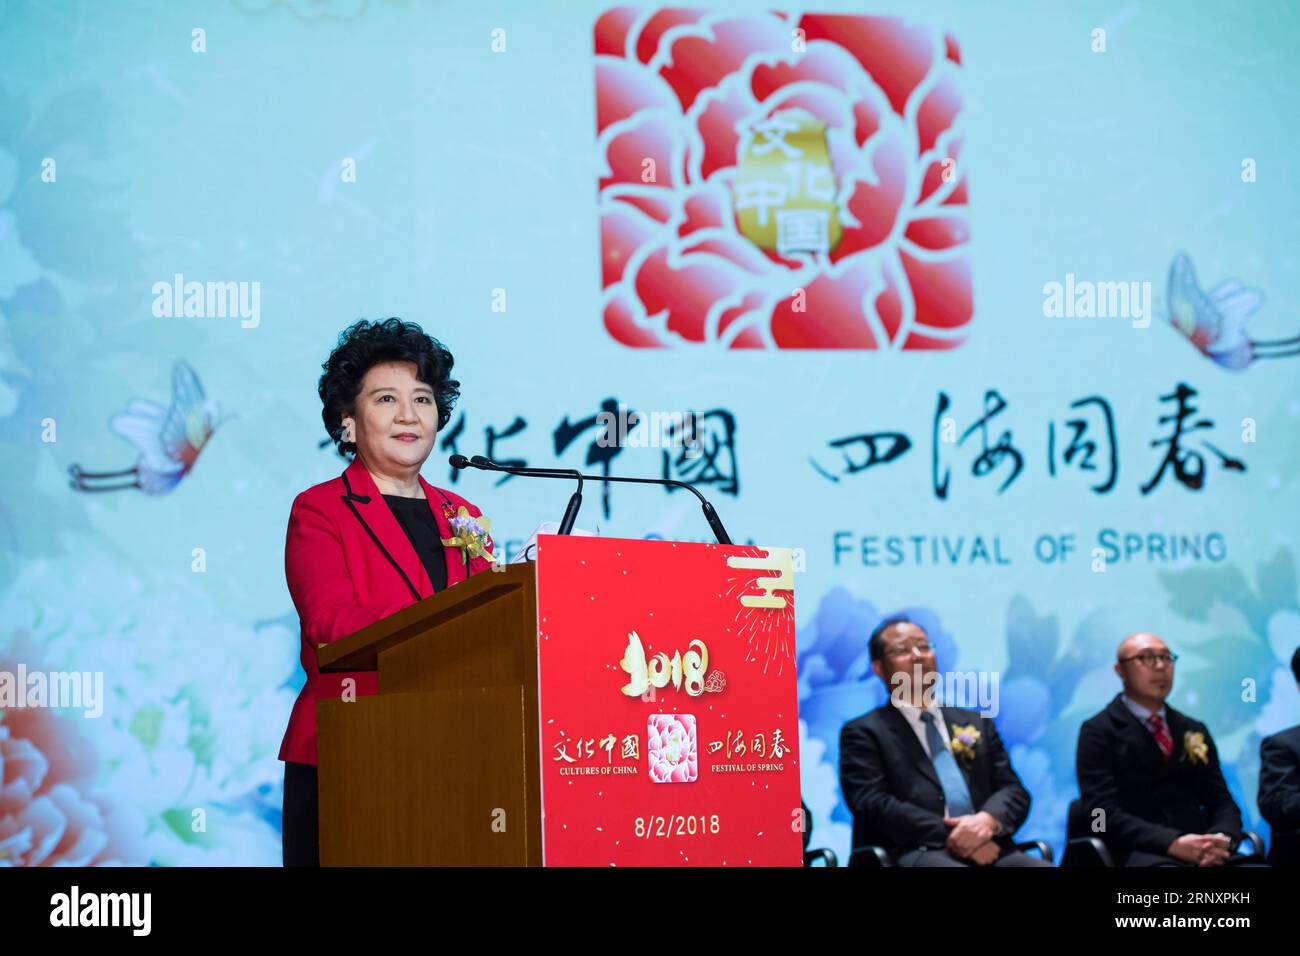 (180209) -- MACAO, Feb. 9, 2018 -- Qiu Yuanping, head of the Overseas Chinese Affairs Office of the State Council, addresses the Cultures of China, Festival of Spring gala to celebrate Chinese lunar New Year, in Macao, south China, Feb. 8, 2018. ) (ly) CHINA-MACAO-SPRING GALA (CN) CheongxKamxKa PUBLICATIONxNOTxINxCHN Stock Photo